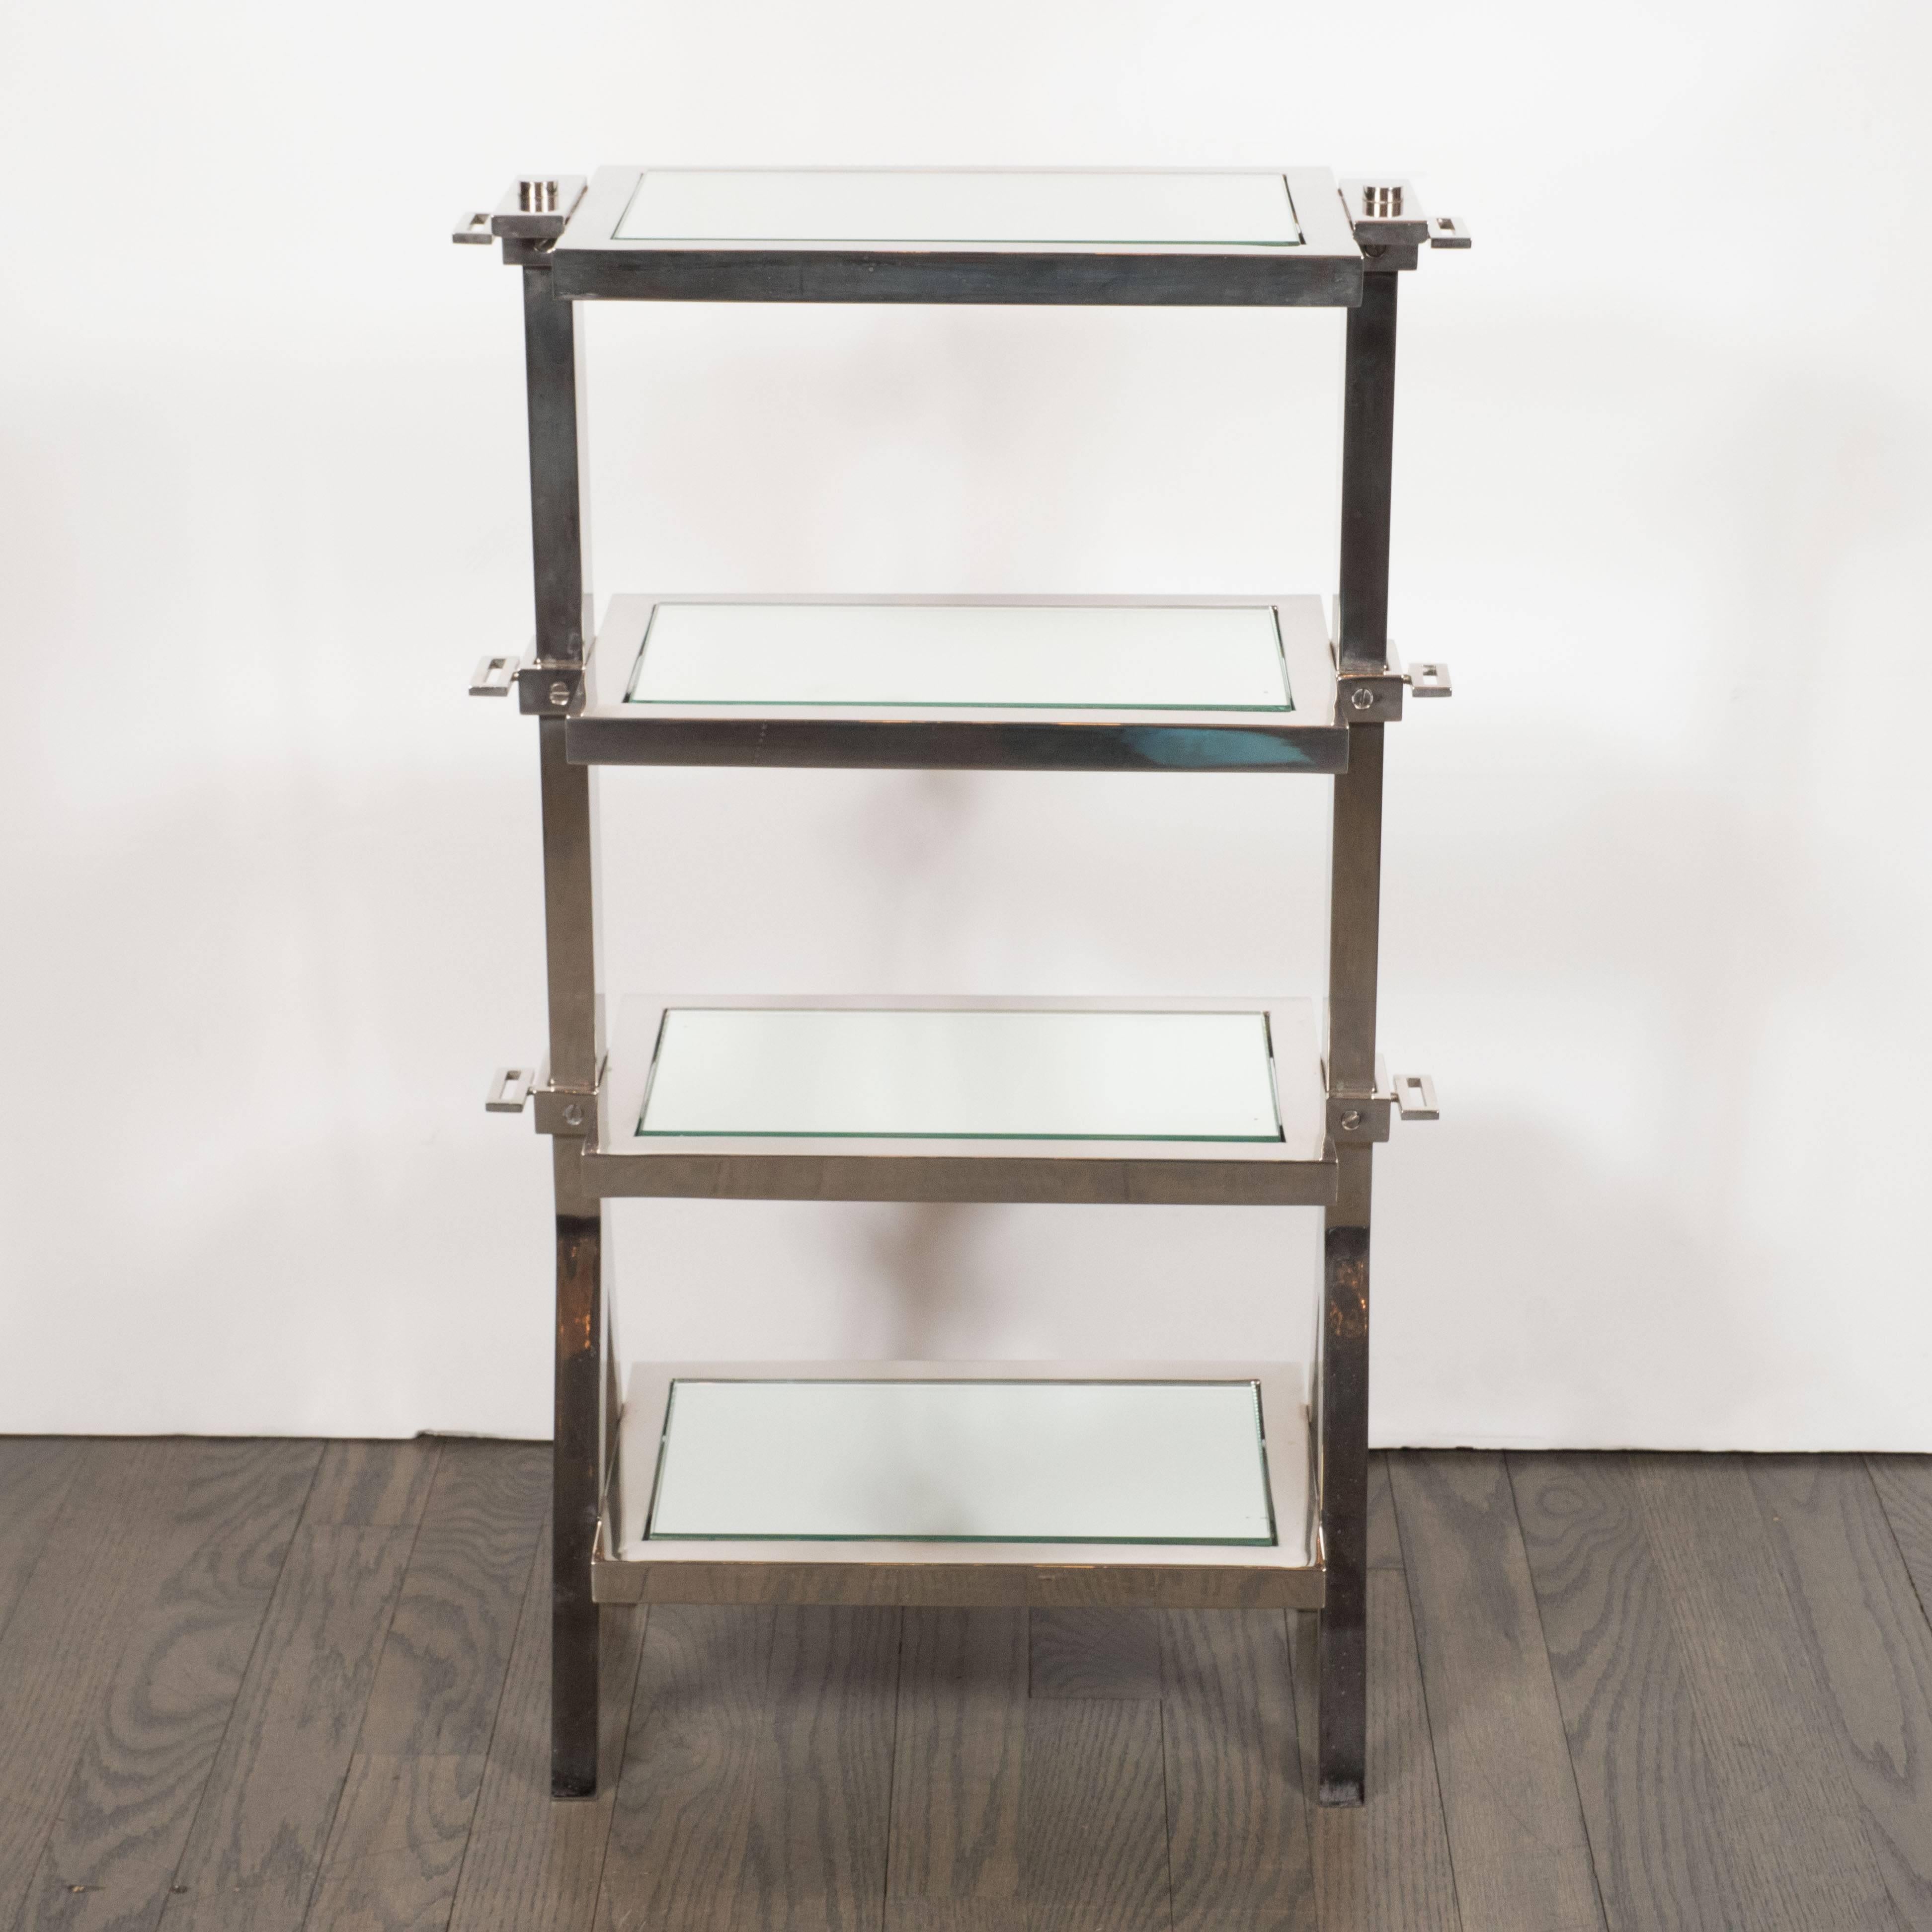 This very elegant nickel and mirror side table feature four tiers with inset beveled mirror panels with splayed leg design. This makes a wonderful drinks tables as well. A great example of the Machine Ages influence on Art Deco in America. Excellent